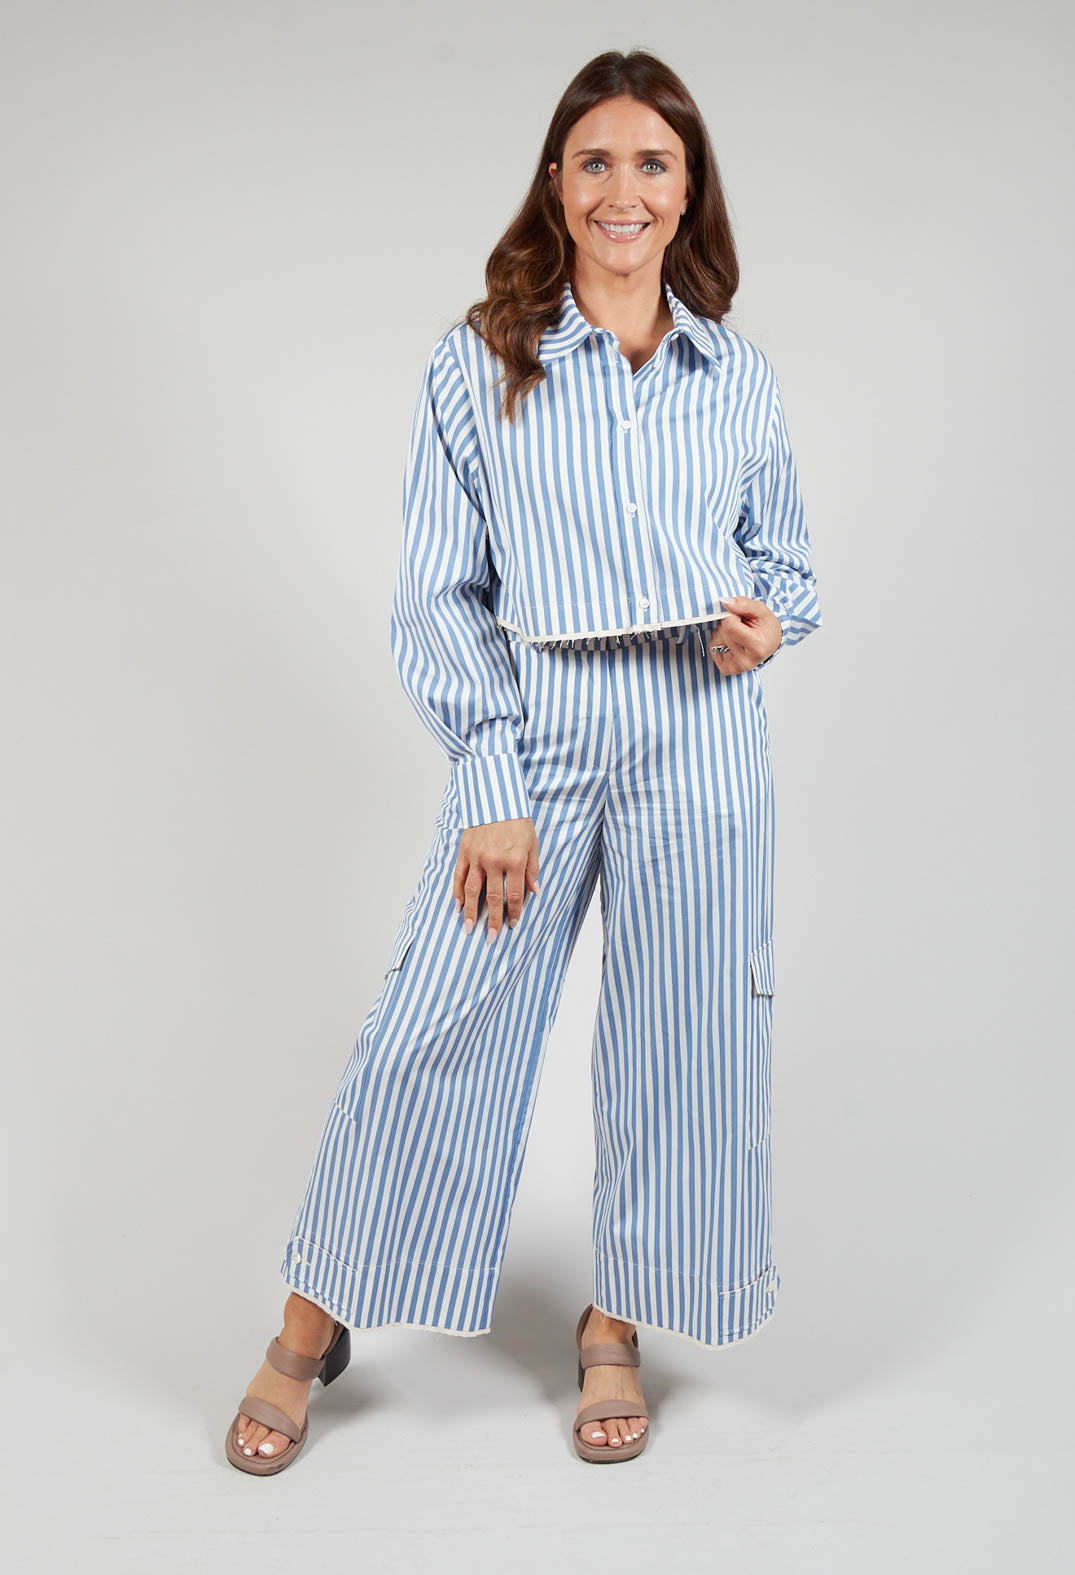 Beatrice B cropped shirt with stripes in blue